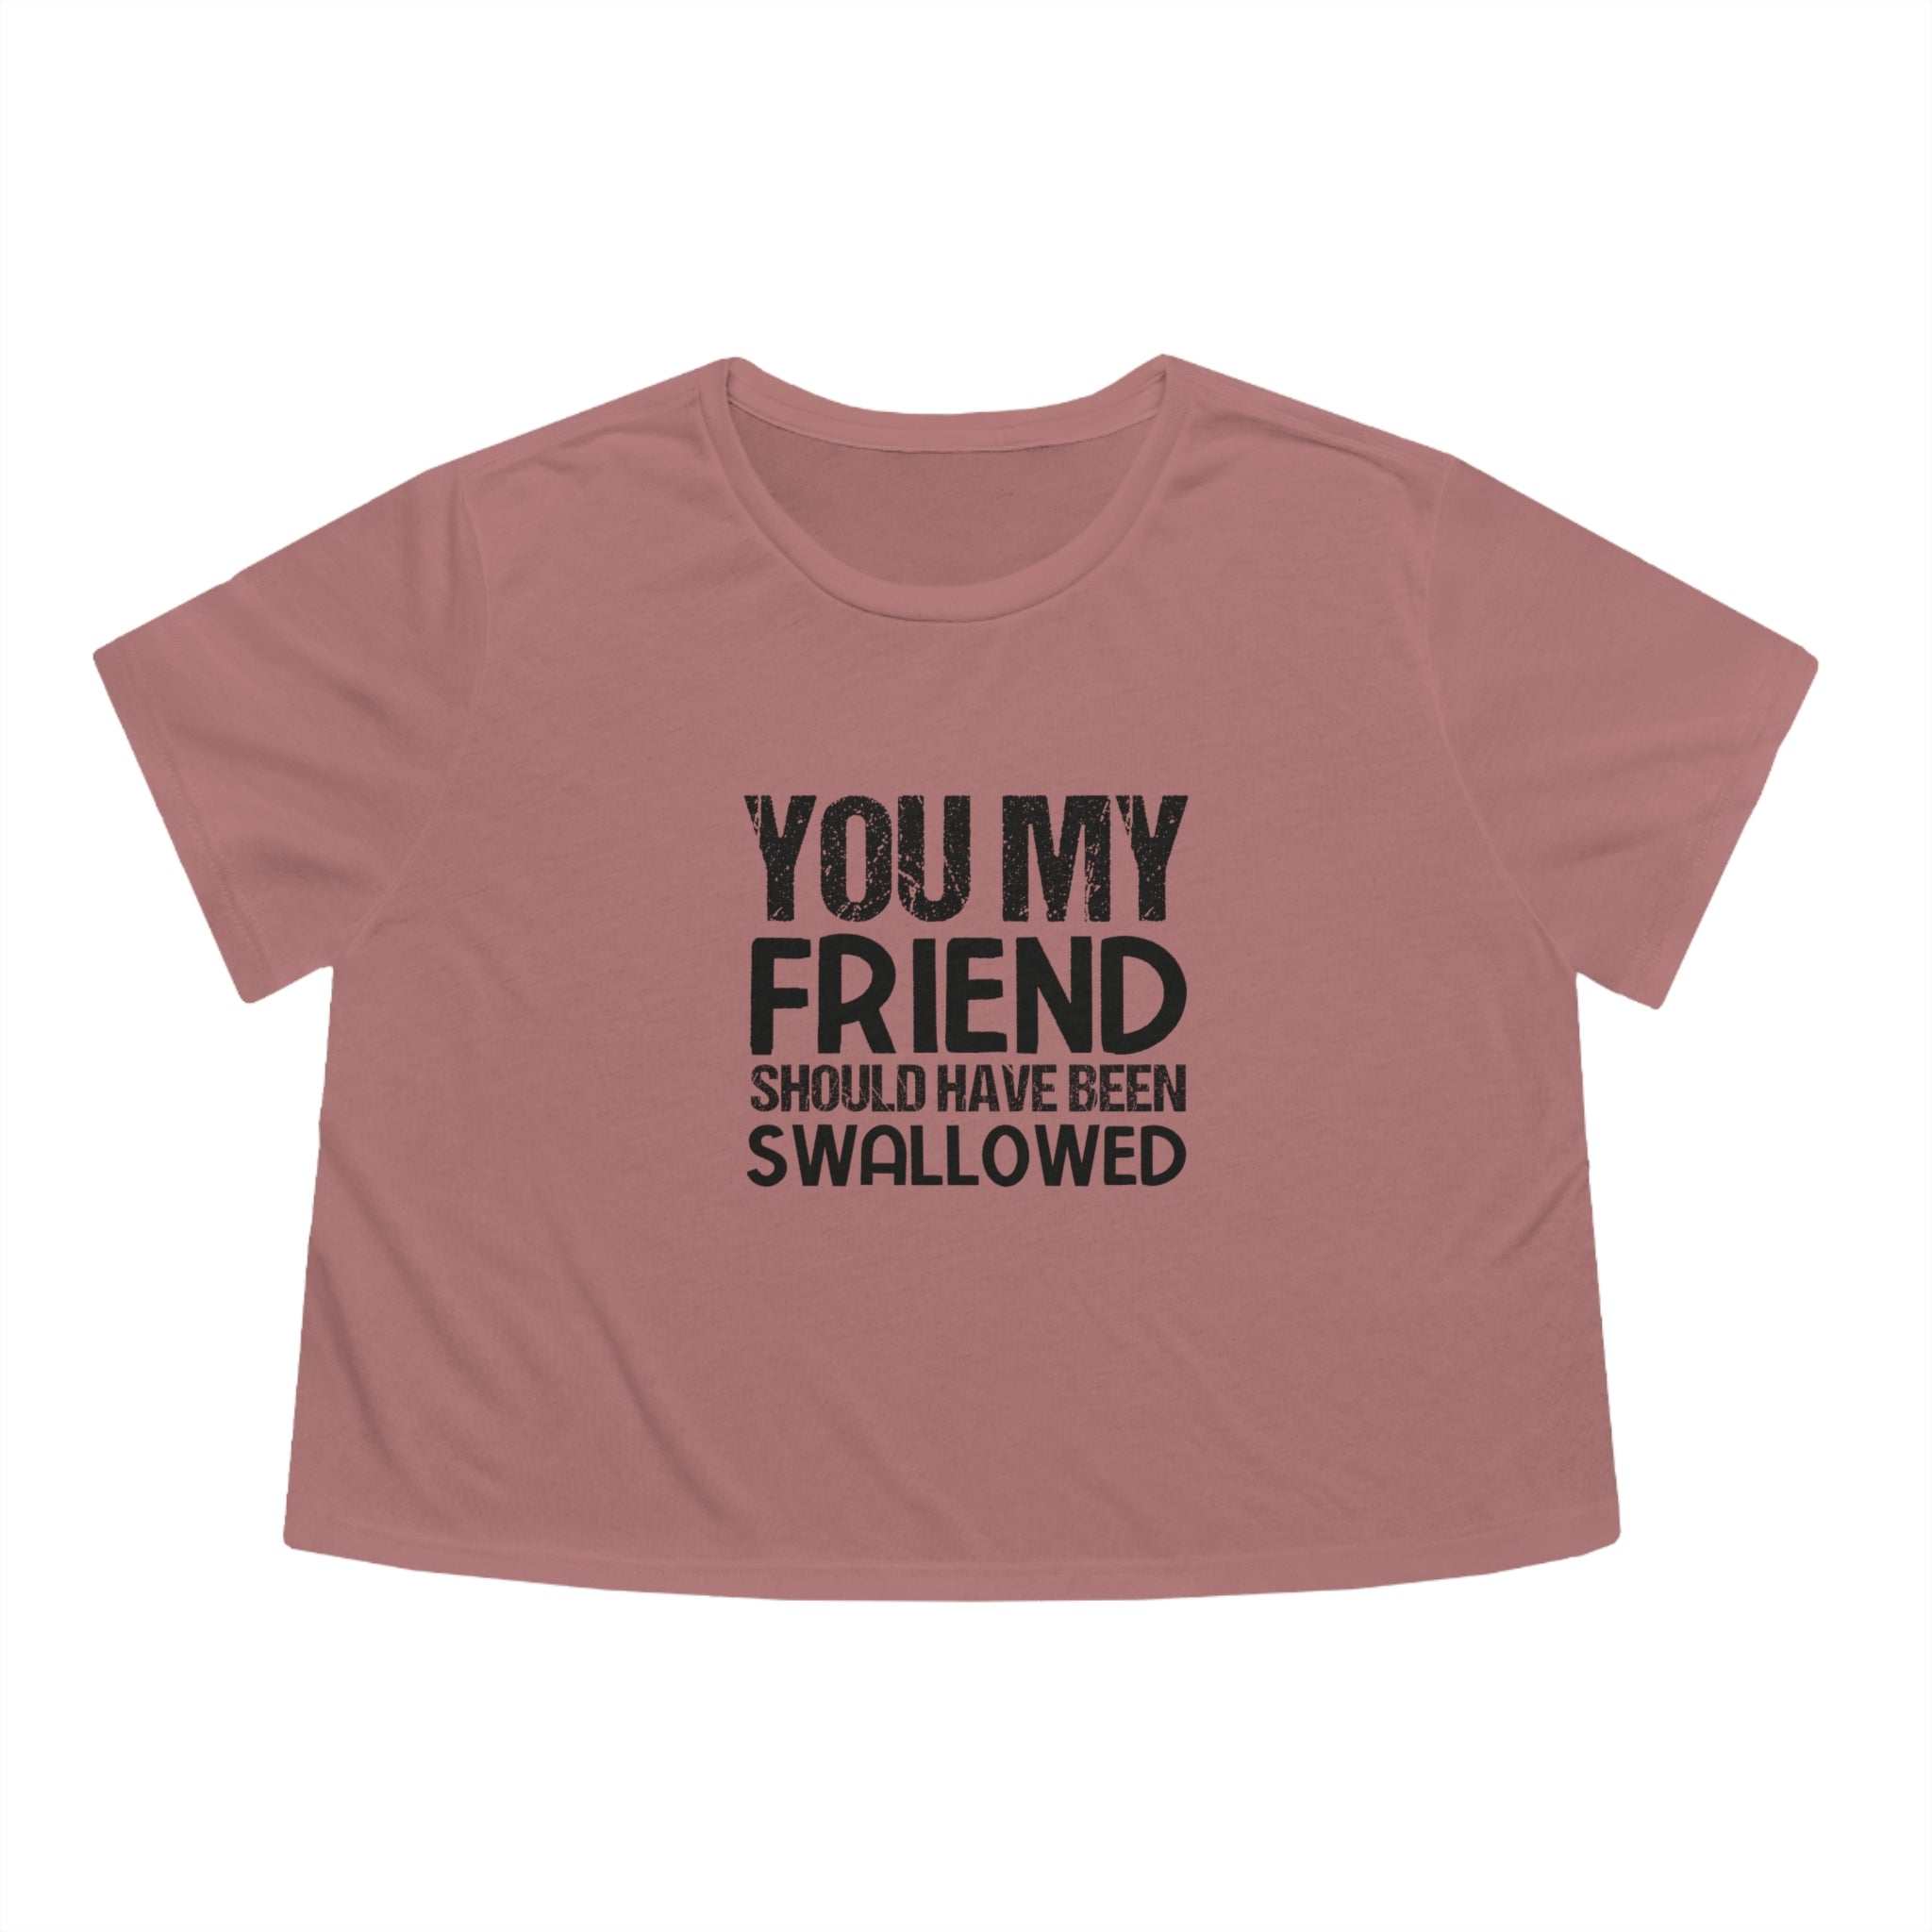 🎁 Ideal for the Sassy and Spirited: Searching for a unique gift that matches the personality of someone with a bold sense of humor? This hilarious cropped tee is a fantastic choice for birthdays, special occasions, or just as a fun surprise for your sassy and spirited friends.